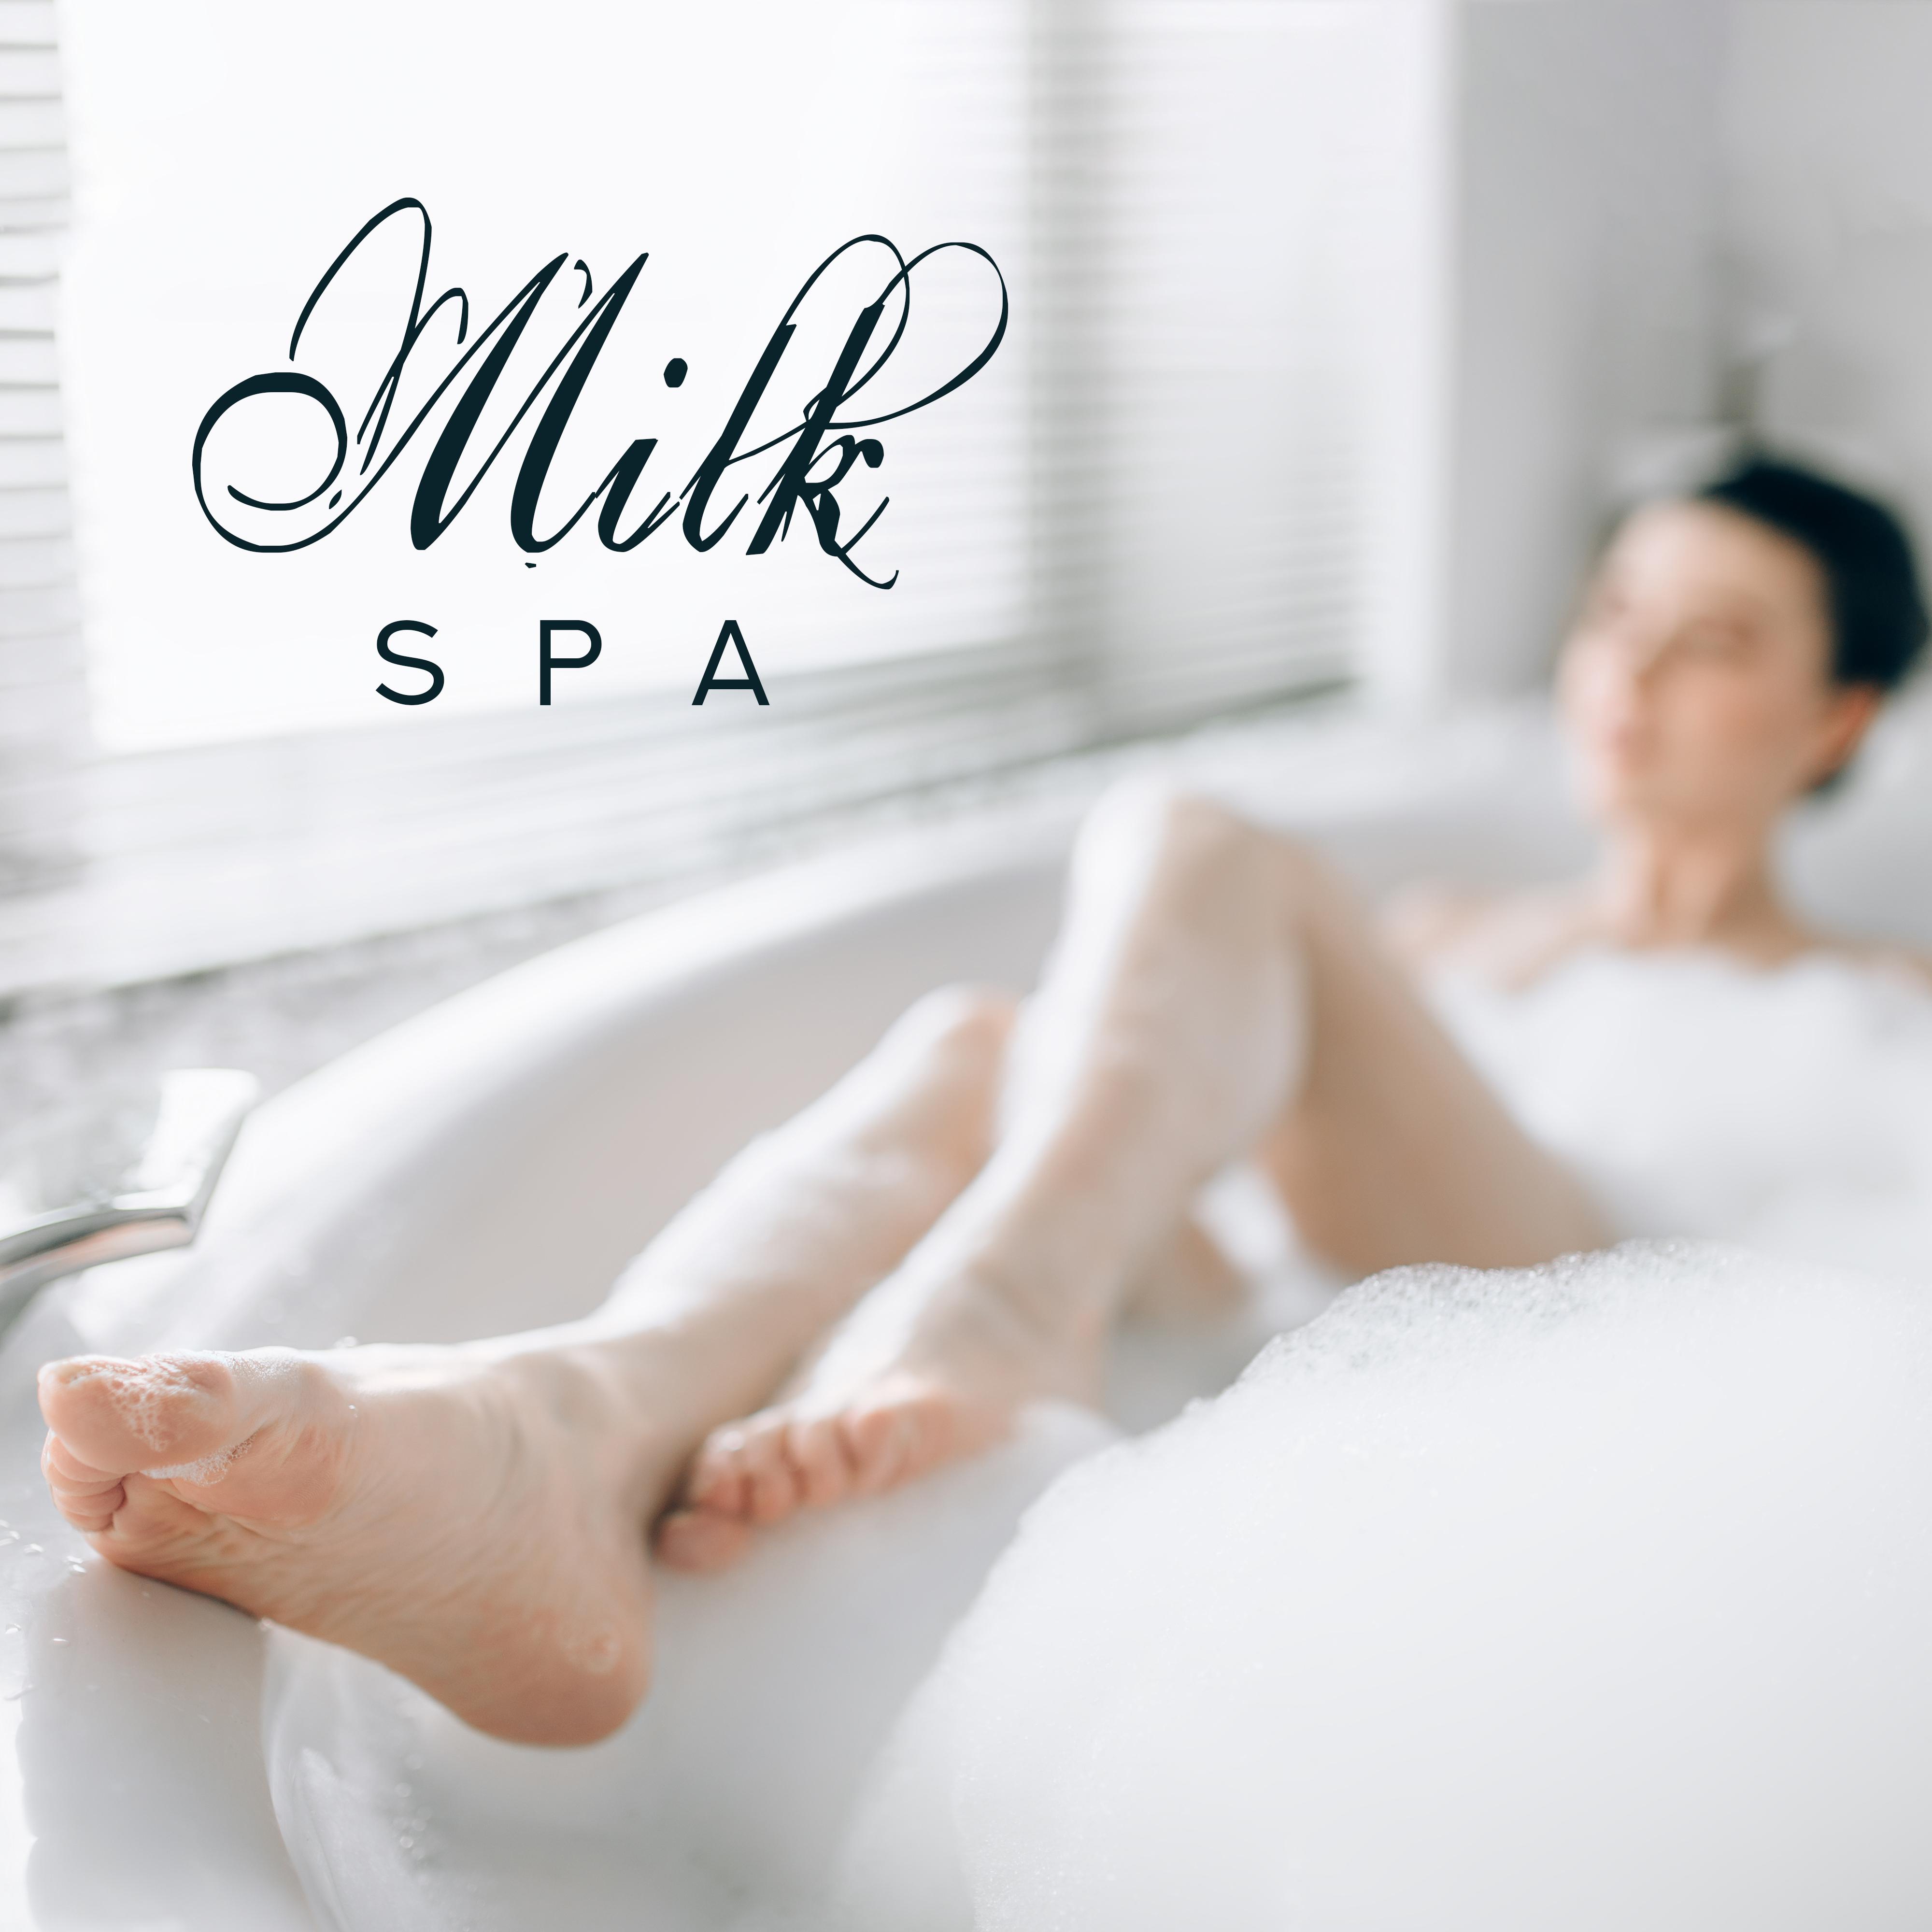 Milk Spa - Chillout Spa Therapy, Relaxing Tones for Massage, Spa, Sleep, Rest, Chillout for Reduce Stress, Wellness Music, Spa Hotel